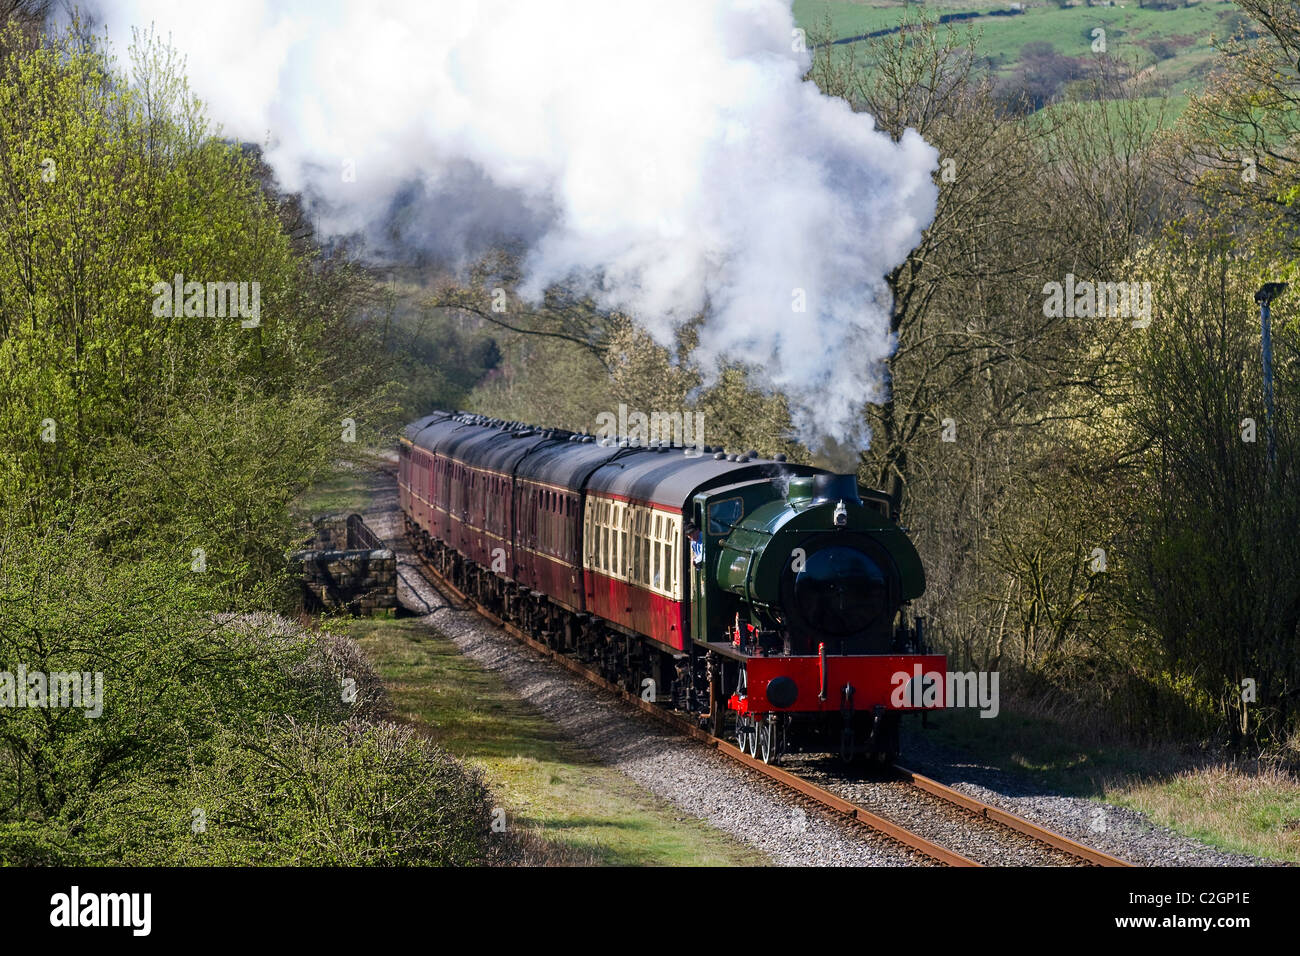 1940s 40s Sapper Austerity locomotive  0-6-0  Wartime fourties Steam loco on the East Lancashire Railway. Burrs Country Park, Bury, UK Stock Photo